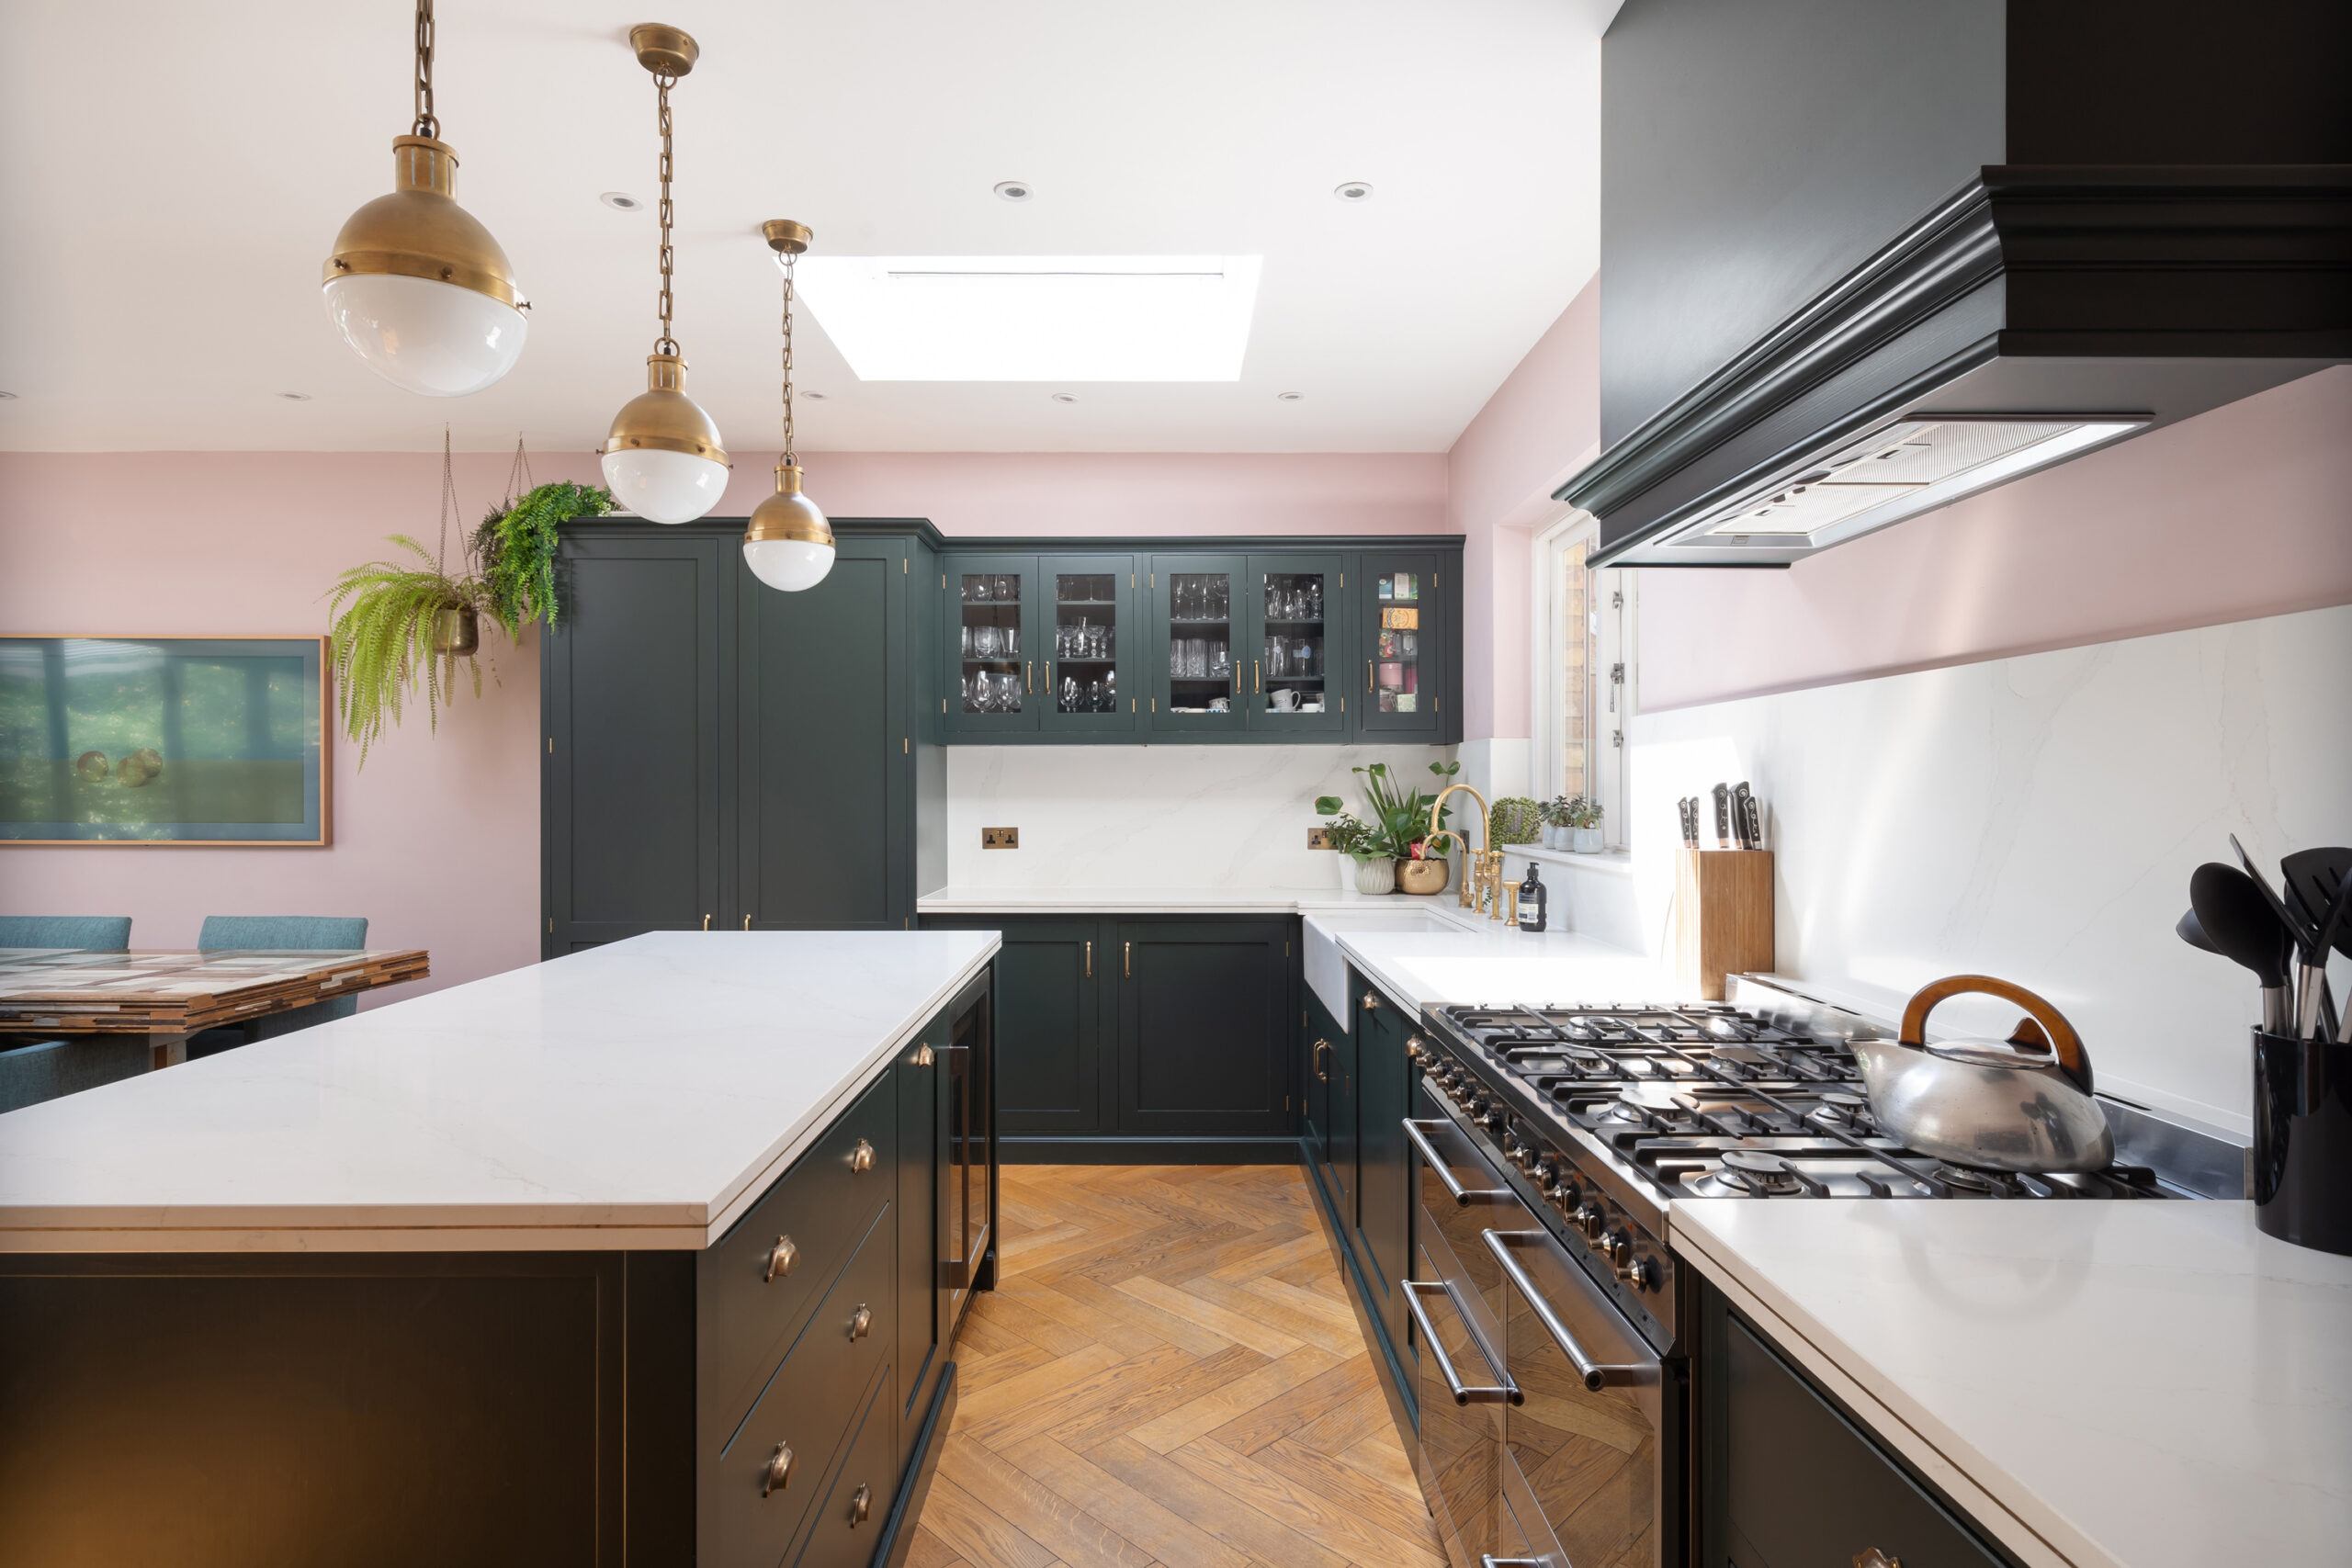 A striking and playful pink and green kitchen